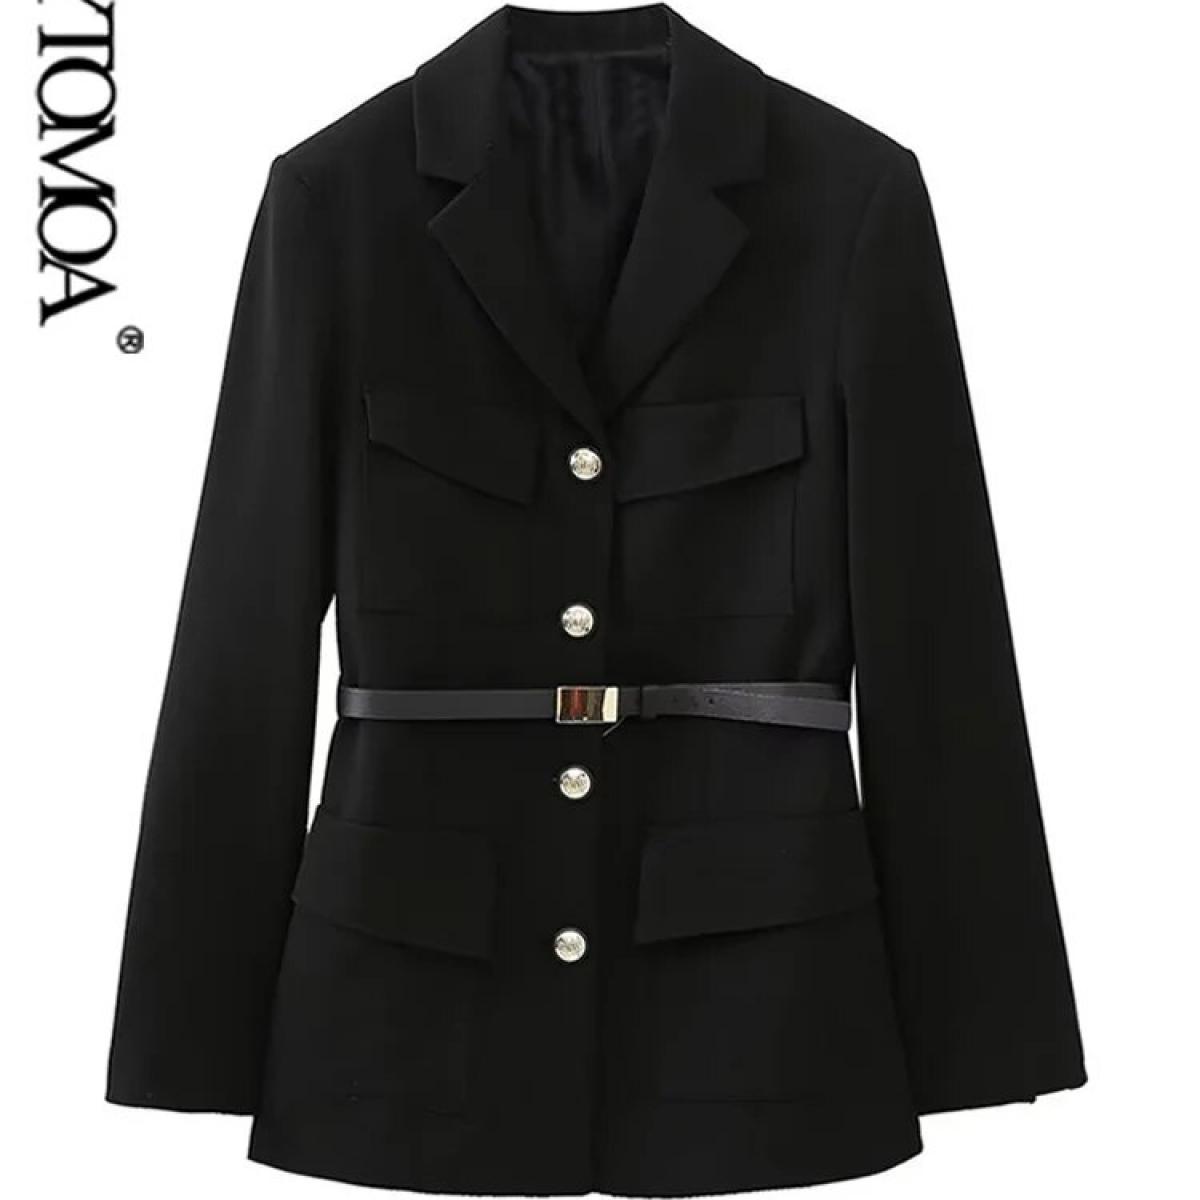 Kpytomoa Women Fashion With Belt Front Gold Button Blazer Coat Vintage Long Sleeve Patch Pockets Female Outerwear Chic T